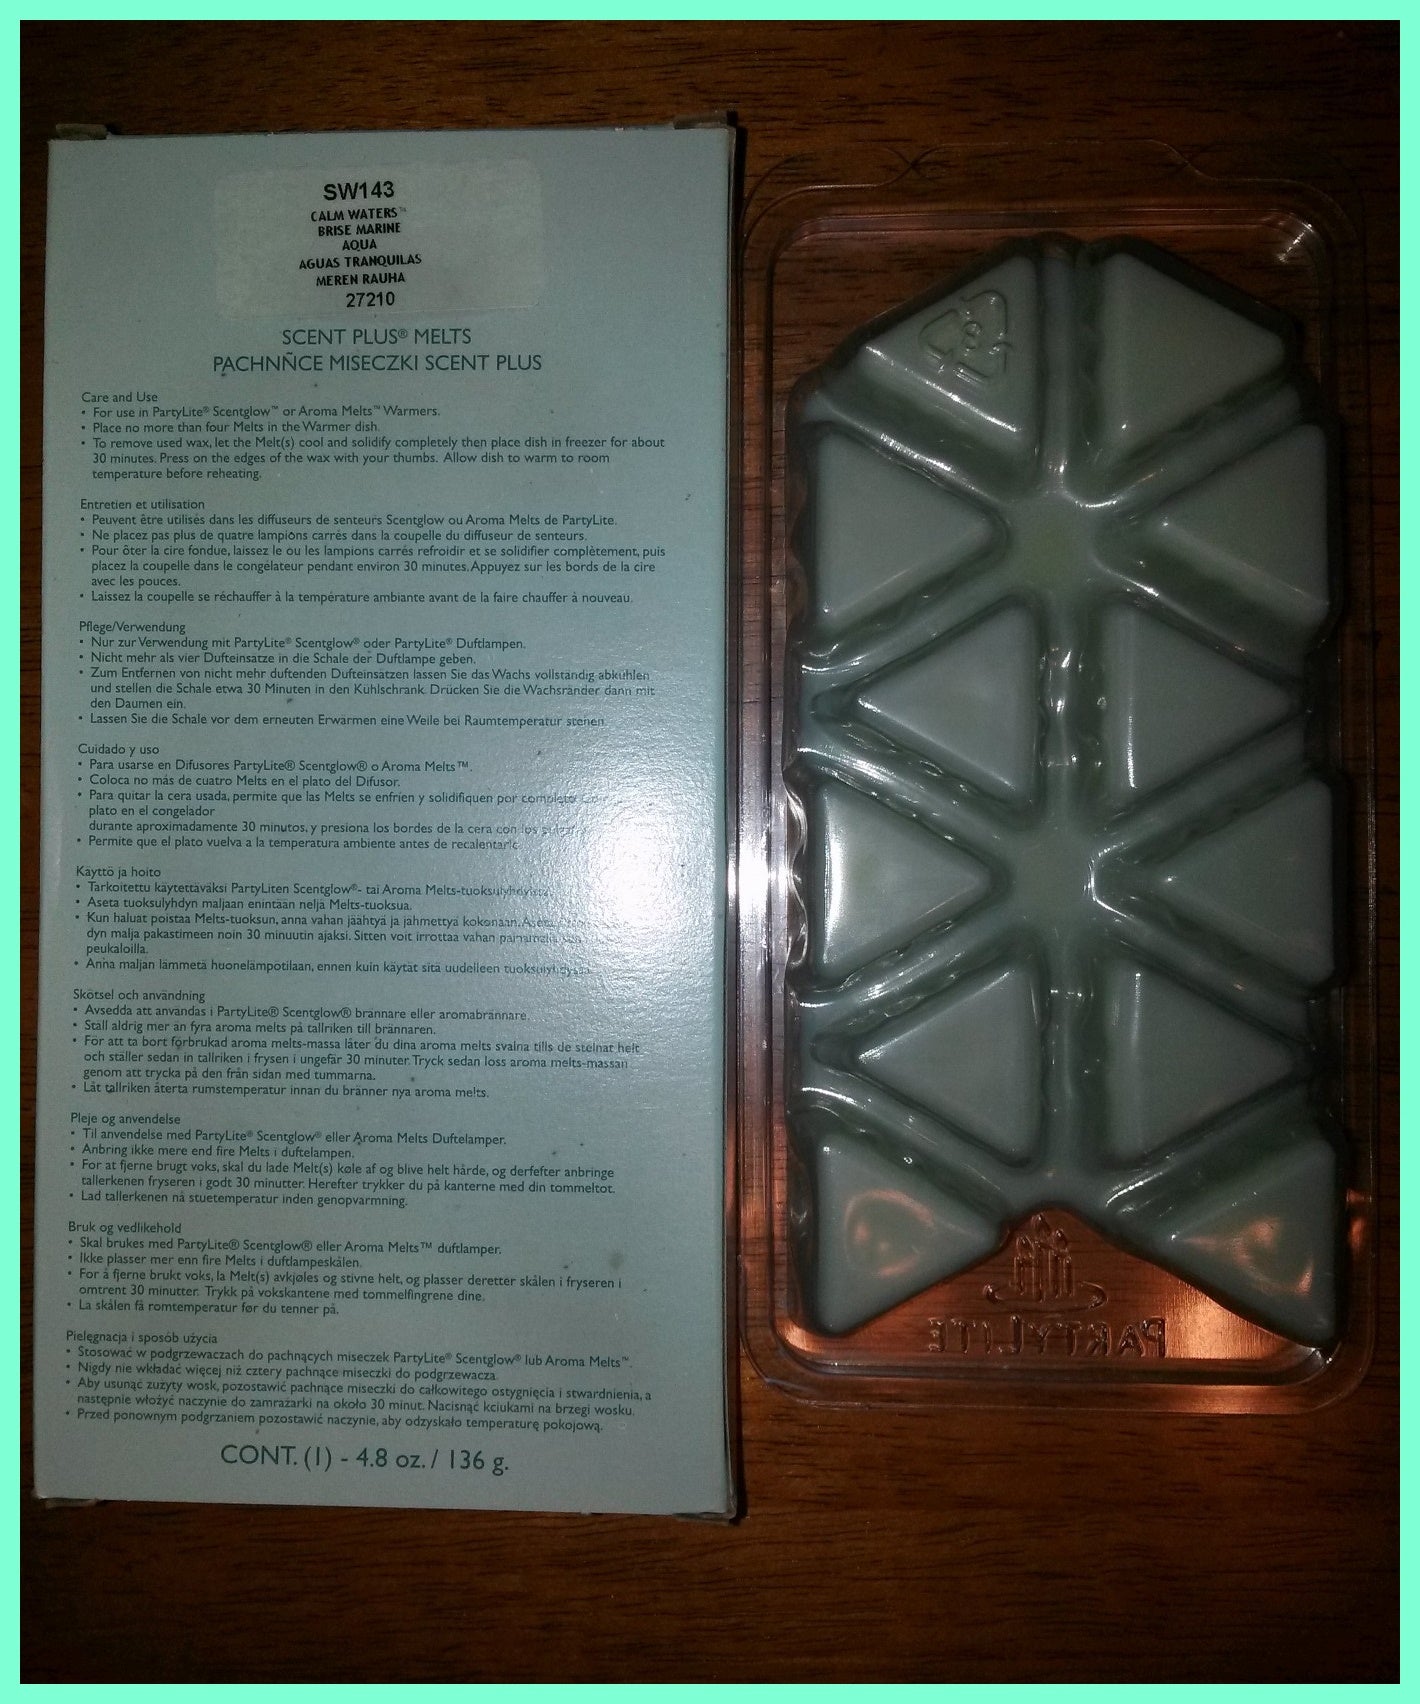 PartyLite 12-pc SCENT PLUS AROMA MELTS Rectangle Brick Scented Simmering Wax CALM WATERS